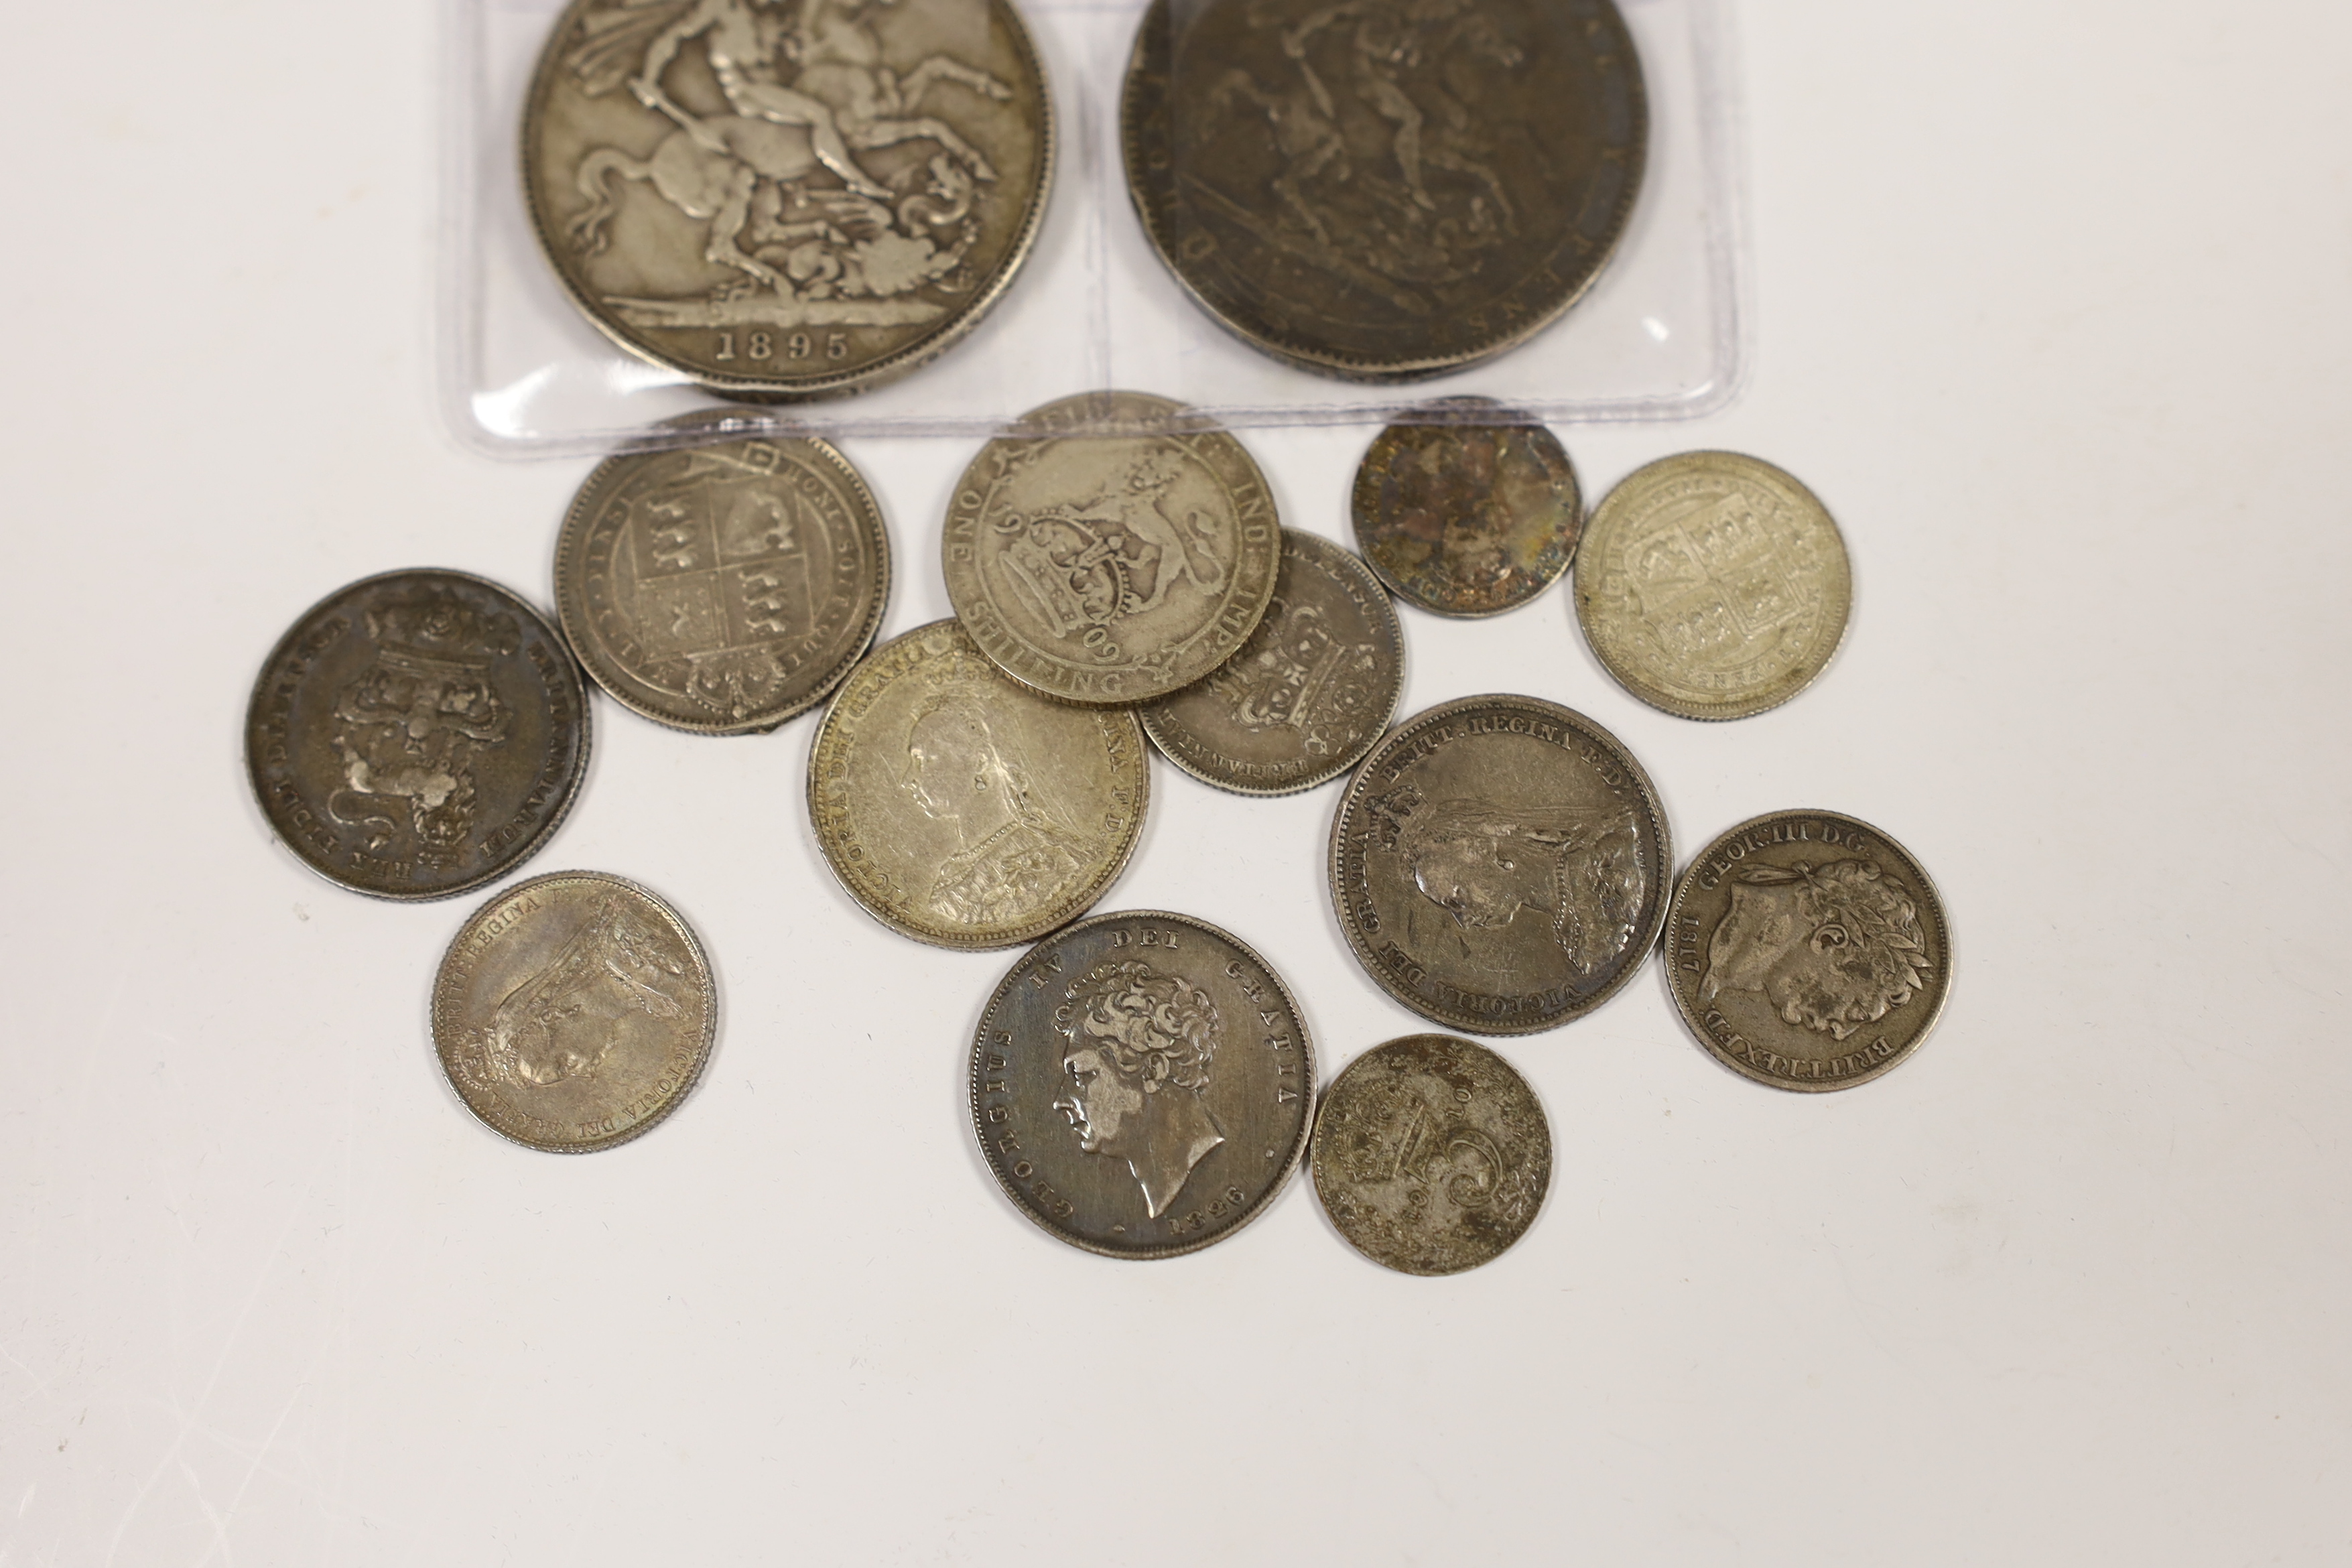 British silver coins, George III to George V, including a William IV shilling 1834, VF, various Victoria shillings 1870, VF, 1901 good VF etc. two crowns, 1819 and 1895, and mixed George III and later silver